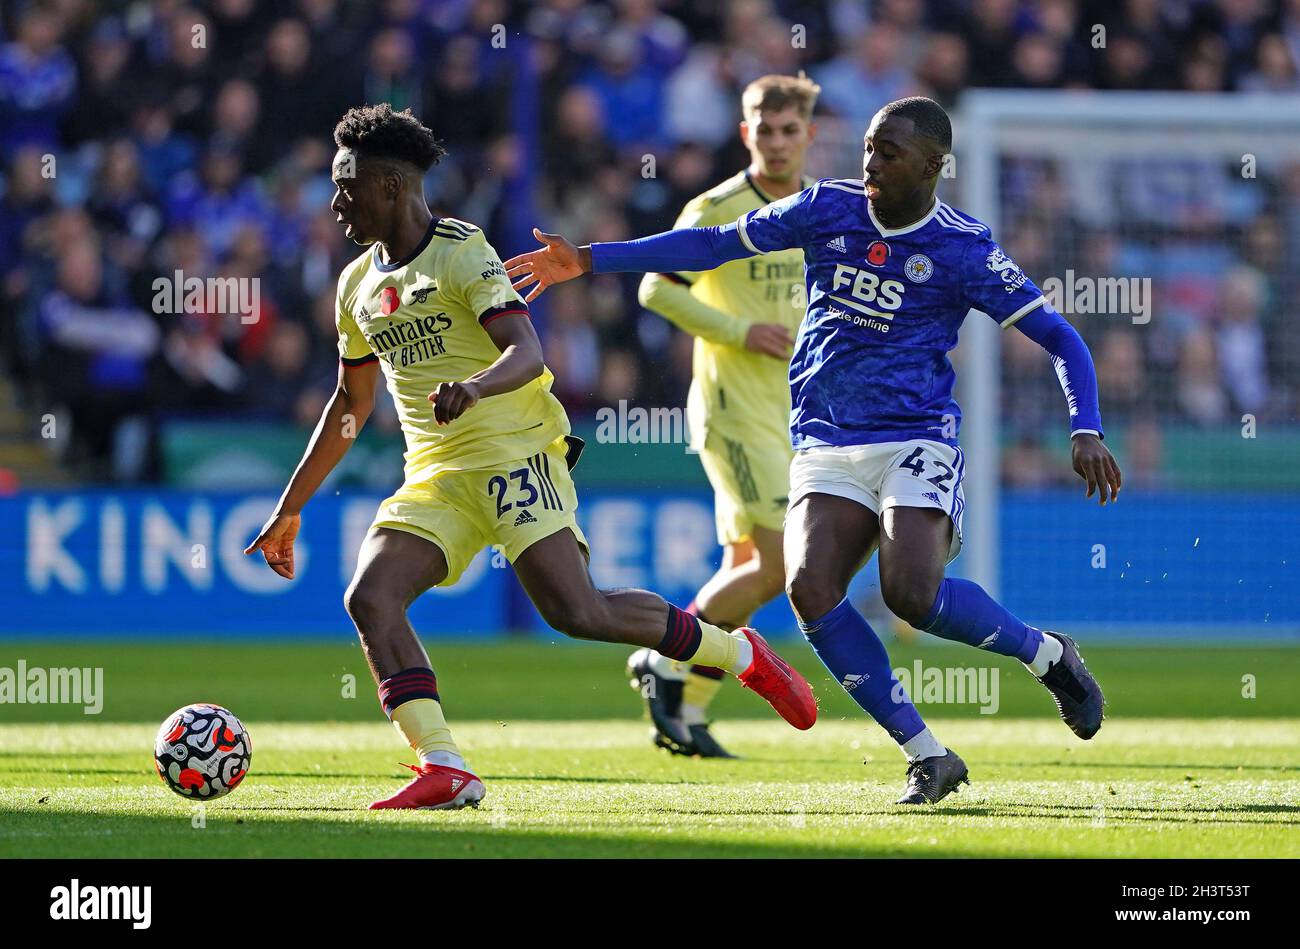 Arsenal's Albert Sambi Lokonga (left) and Leicester City's Boubakary Soumare battle for the ball during the Premier League match at the King Power Stadium, Leicester. Picture date: Saturday October 30, 2021. Stock Photo